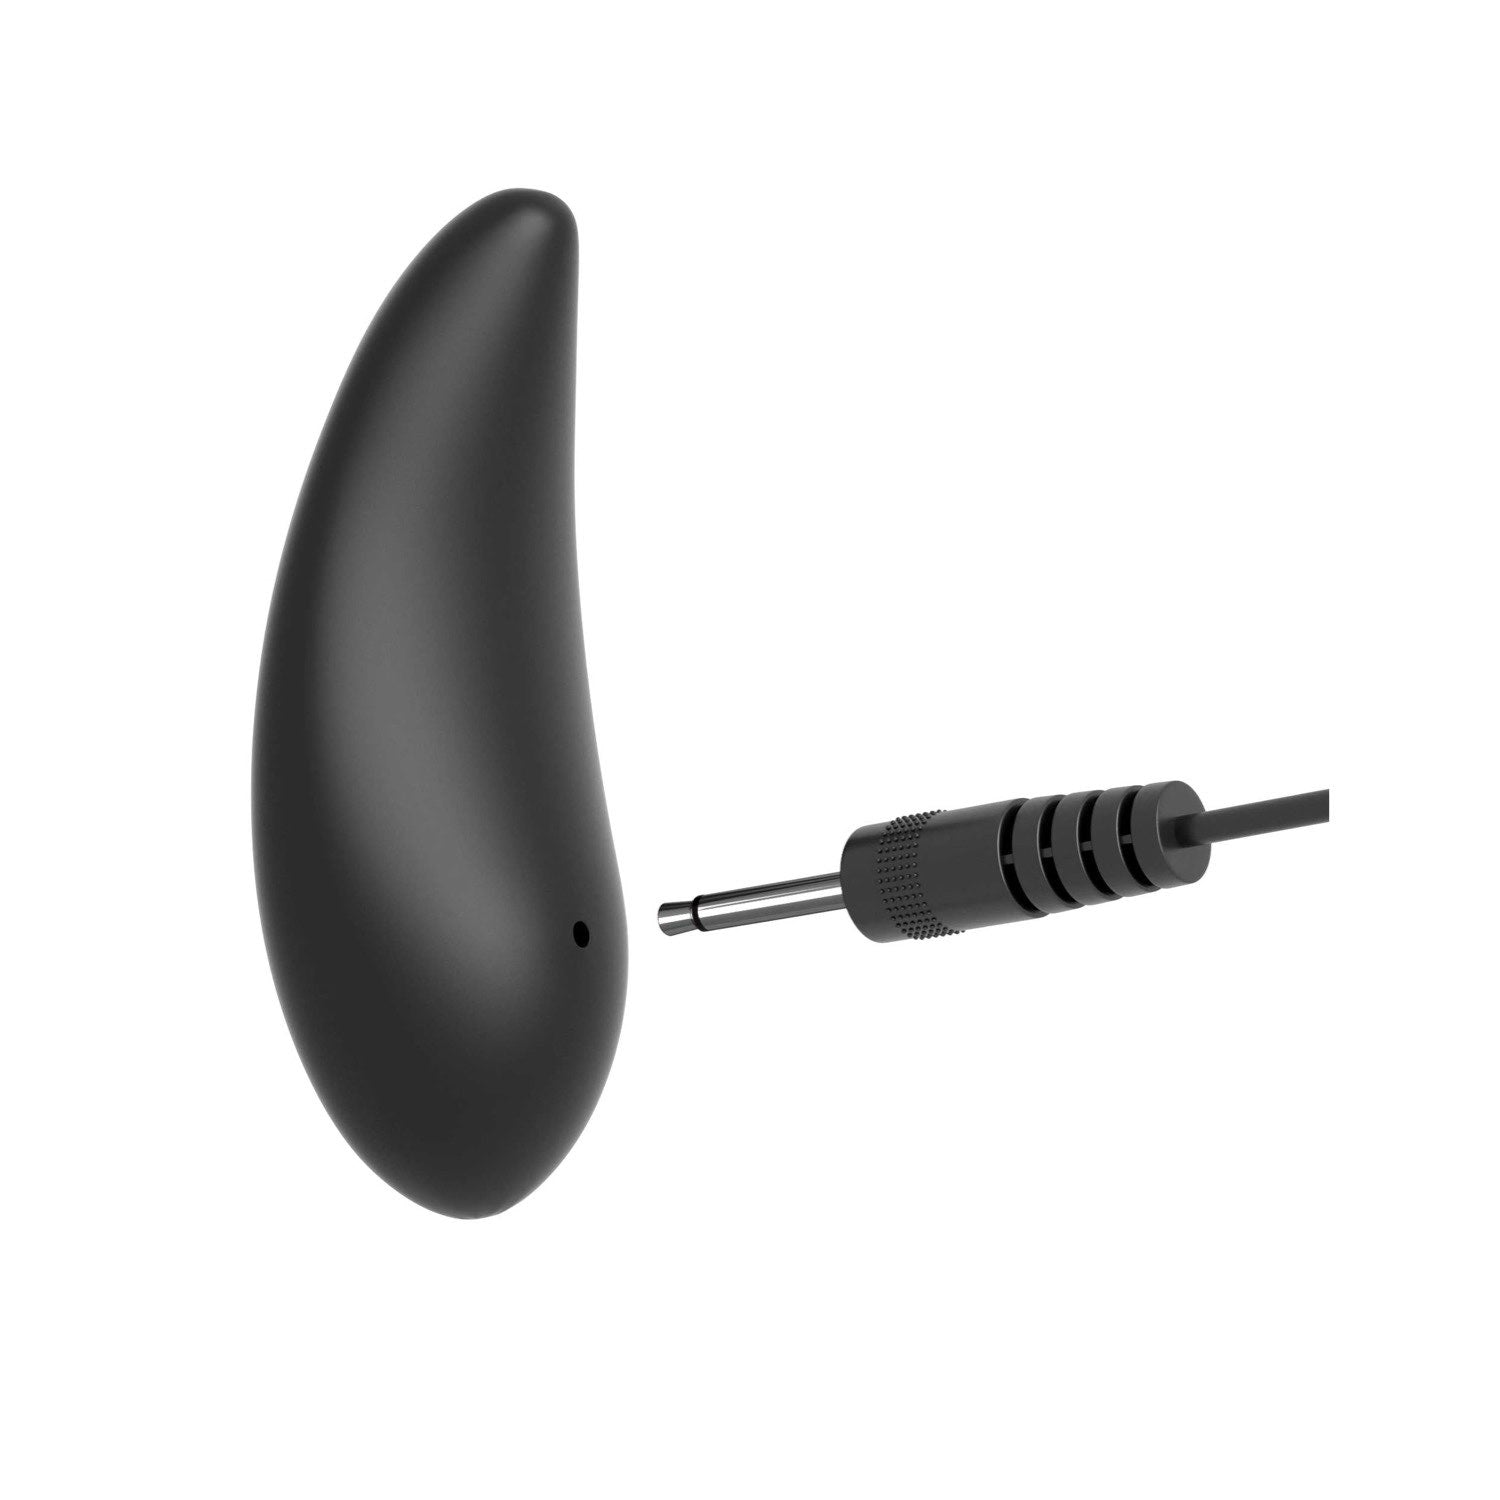 Anal Fantasy Collection Remote Control Silicone Plug - Black 10 cm (4&quot;) Rechargeable Vibrating Butt Plug by Pipedream